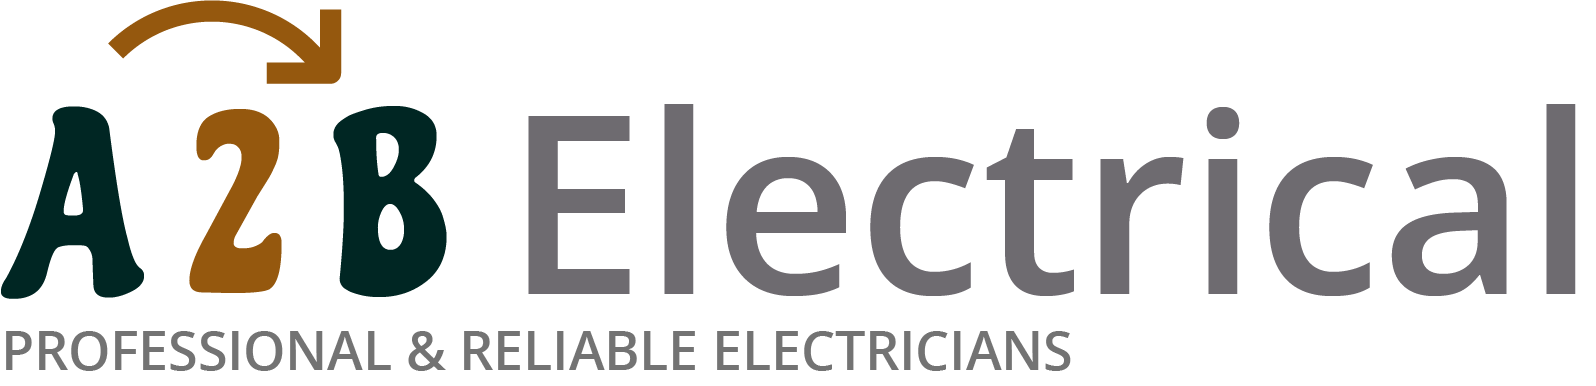 If you have electrical wiring problems in Tower Hamlets, we can provide an electrician to have a look for you. 